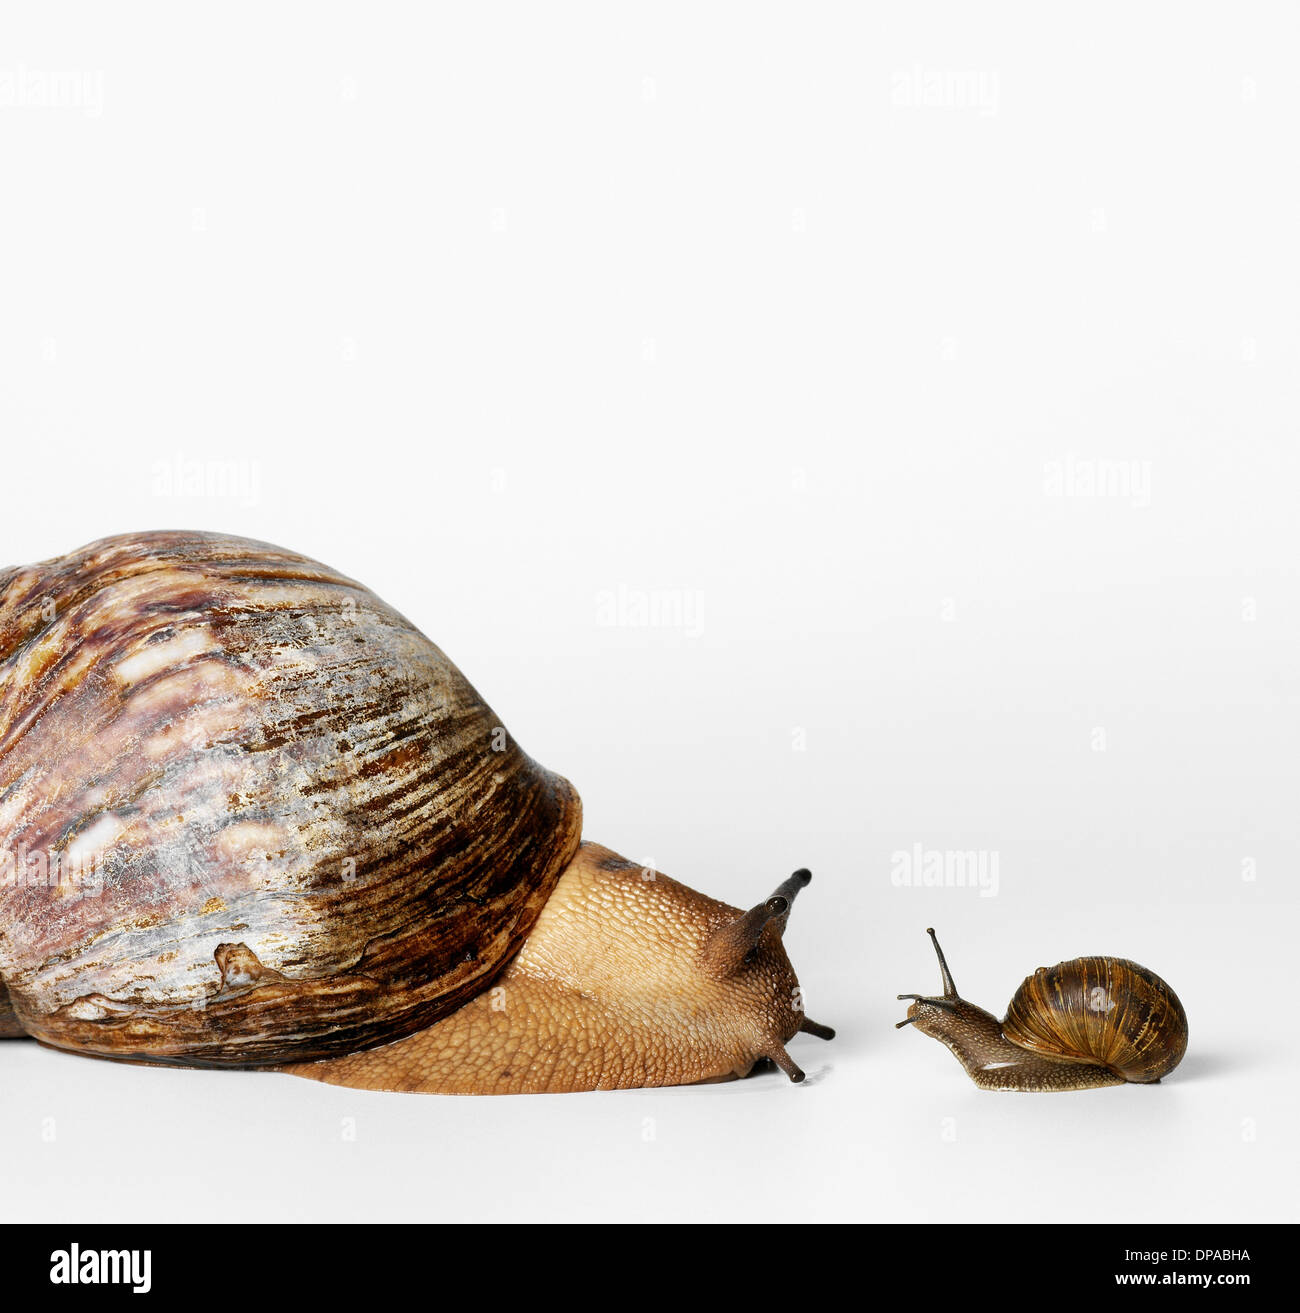 Little and Big Snails Stock Photo